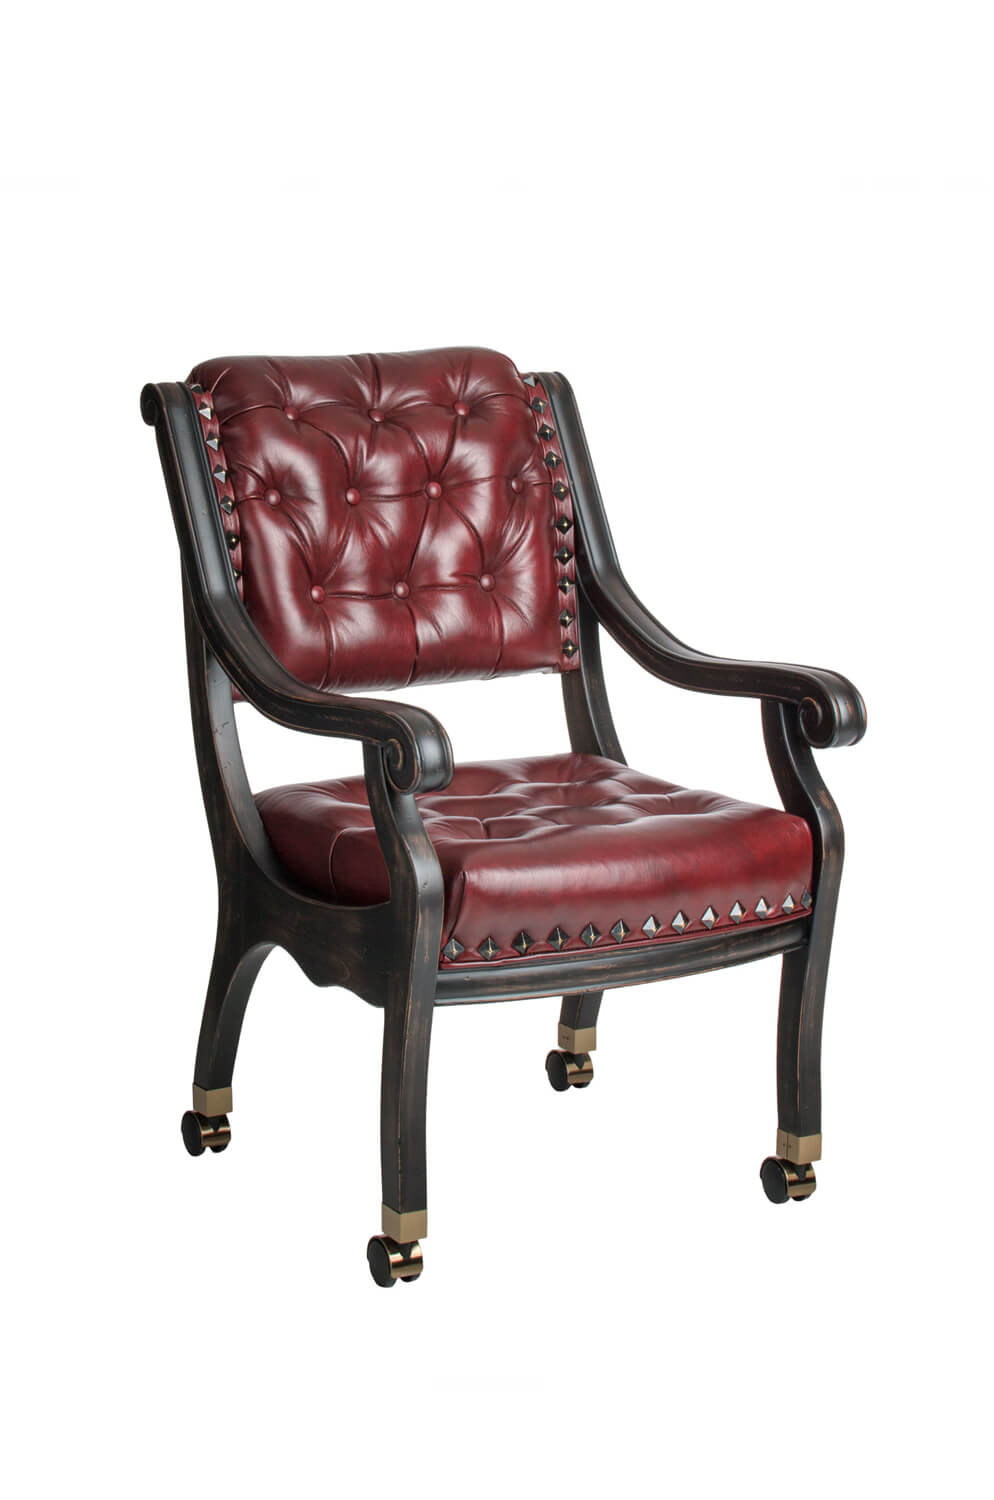 Ponce De Leon Maple Club Arm Chair with Casters